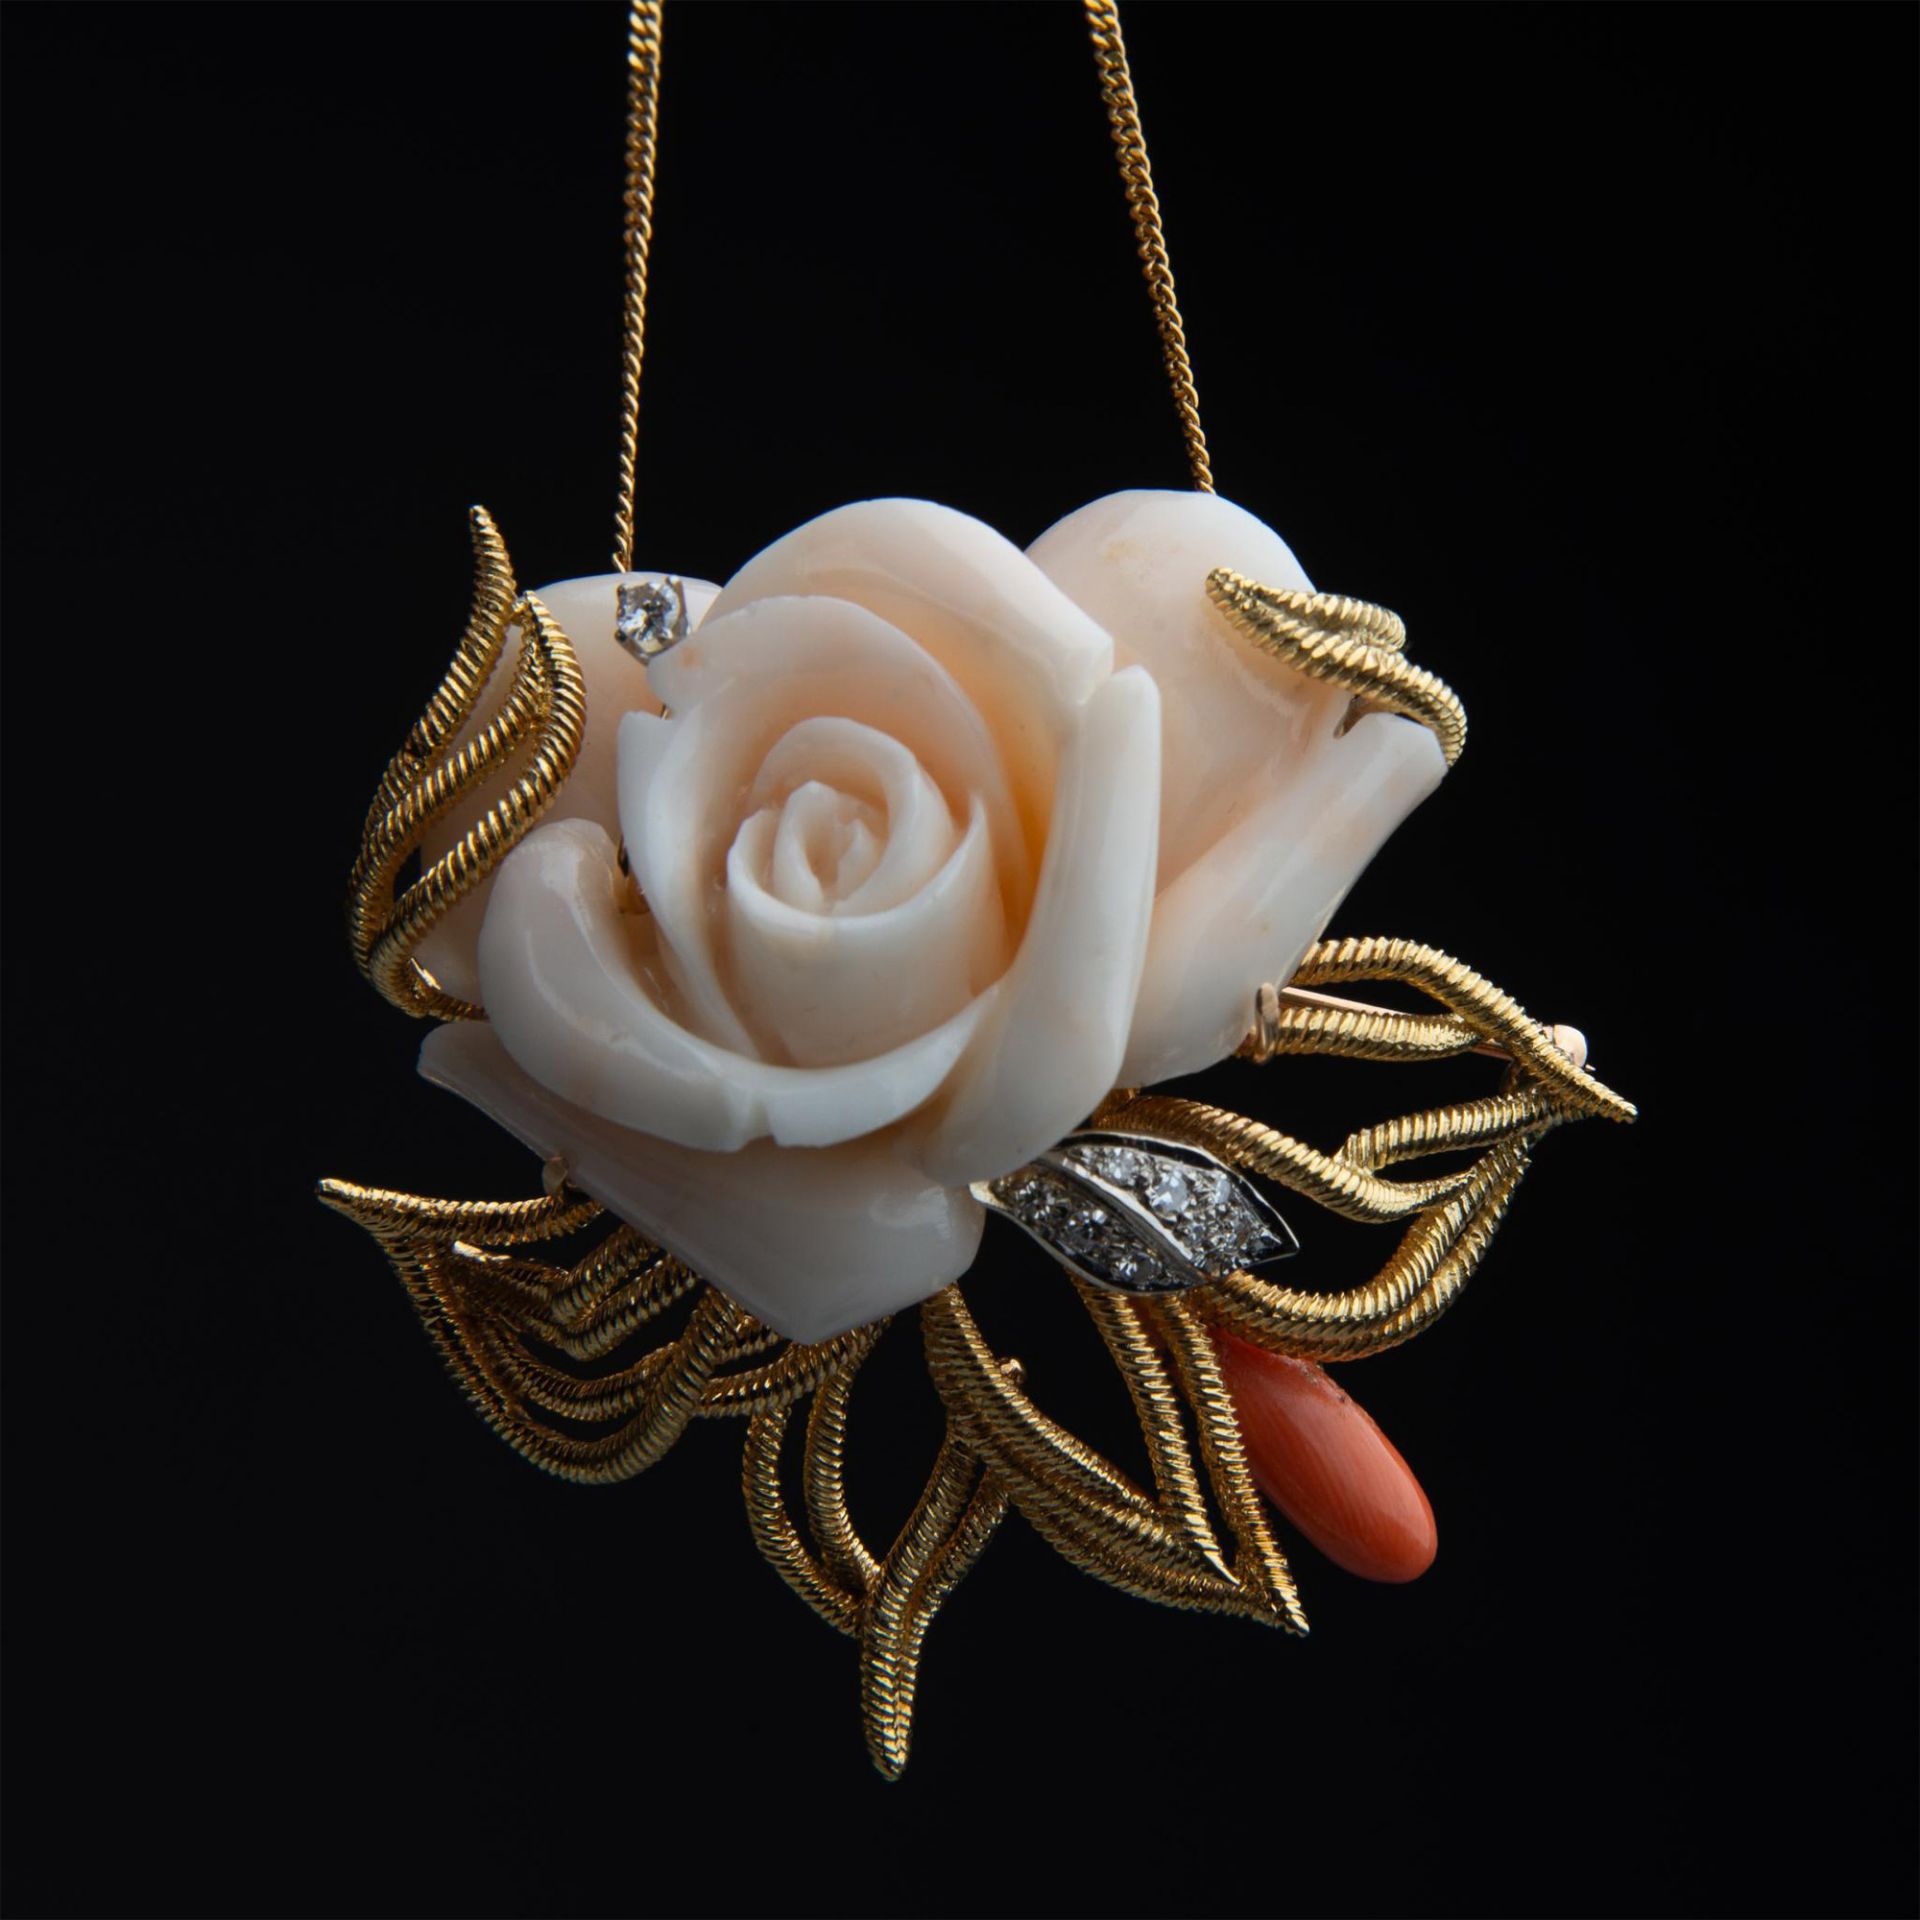 Gorgeous Large 18K Gold, Coral & Diamond Rose Pendant Brooch - Image 4 of 6